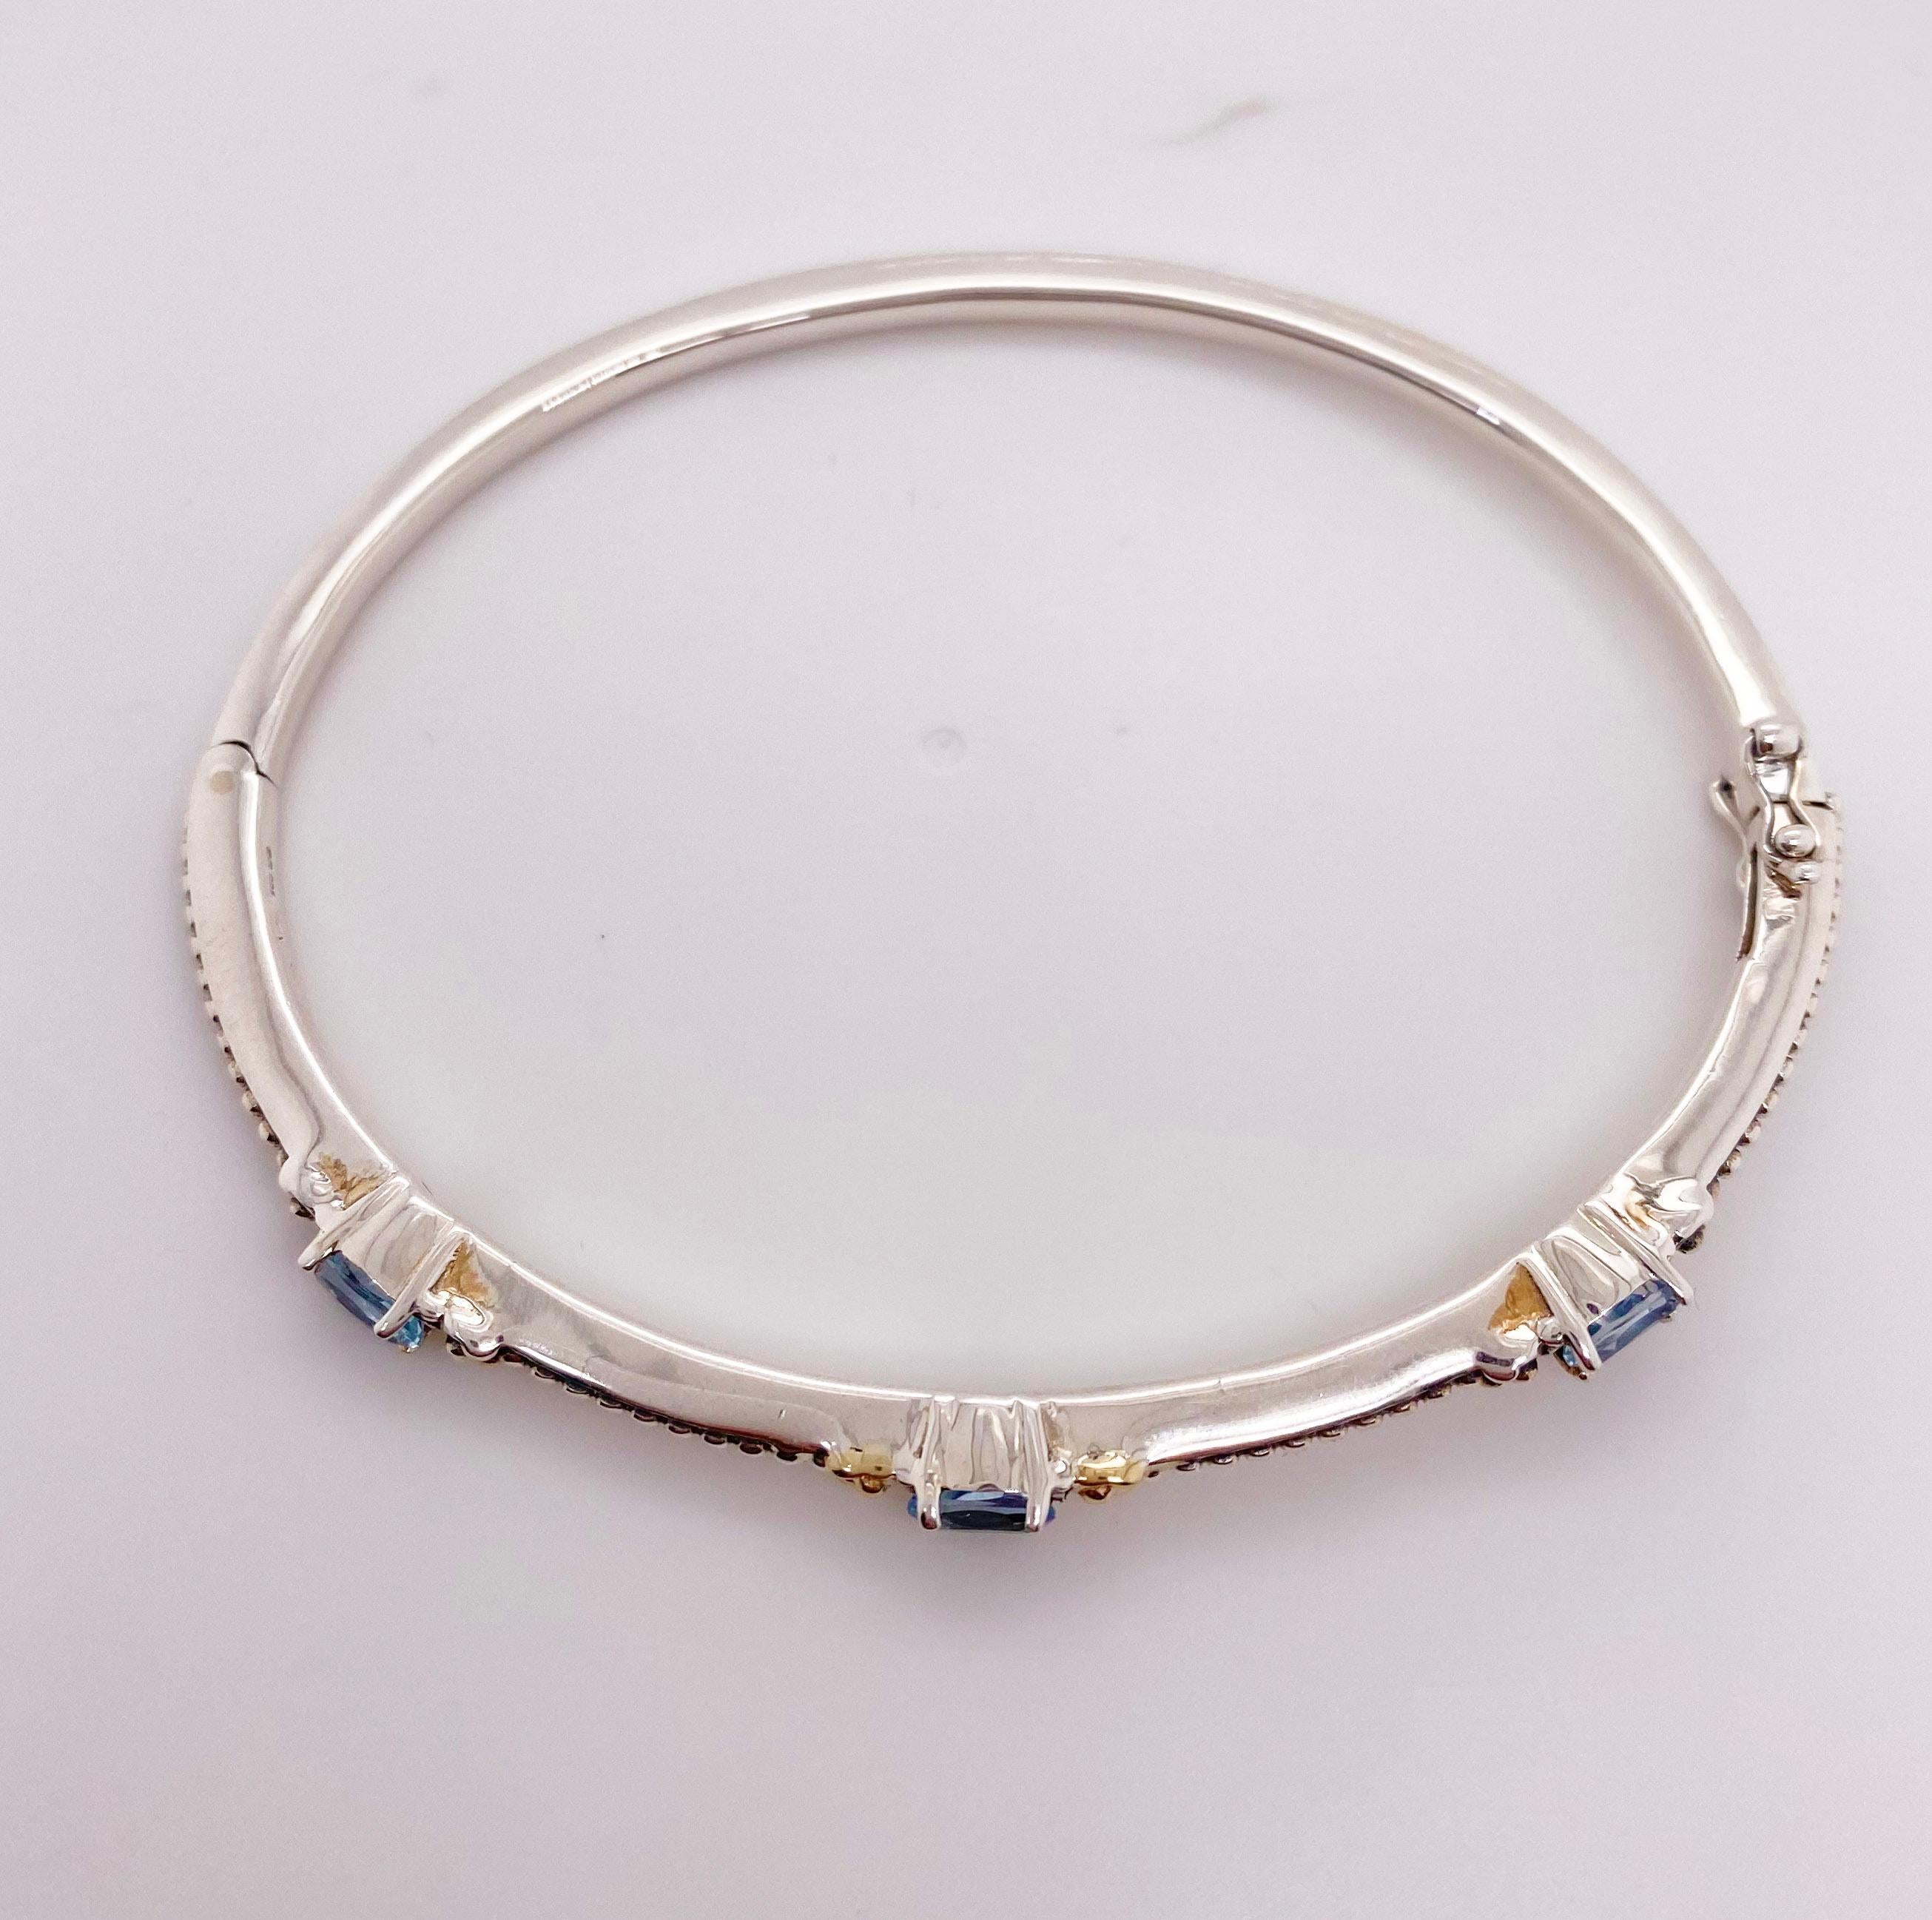 This bangle bracelet in mixed metals is a nice addition to any jewelry wardrobe. It looks great with other sterling or white gold items but can also mix with your yellow gold jewelry.  The beading detail and design of the bracelet is very becoming